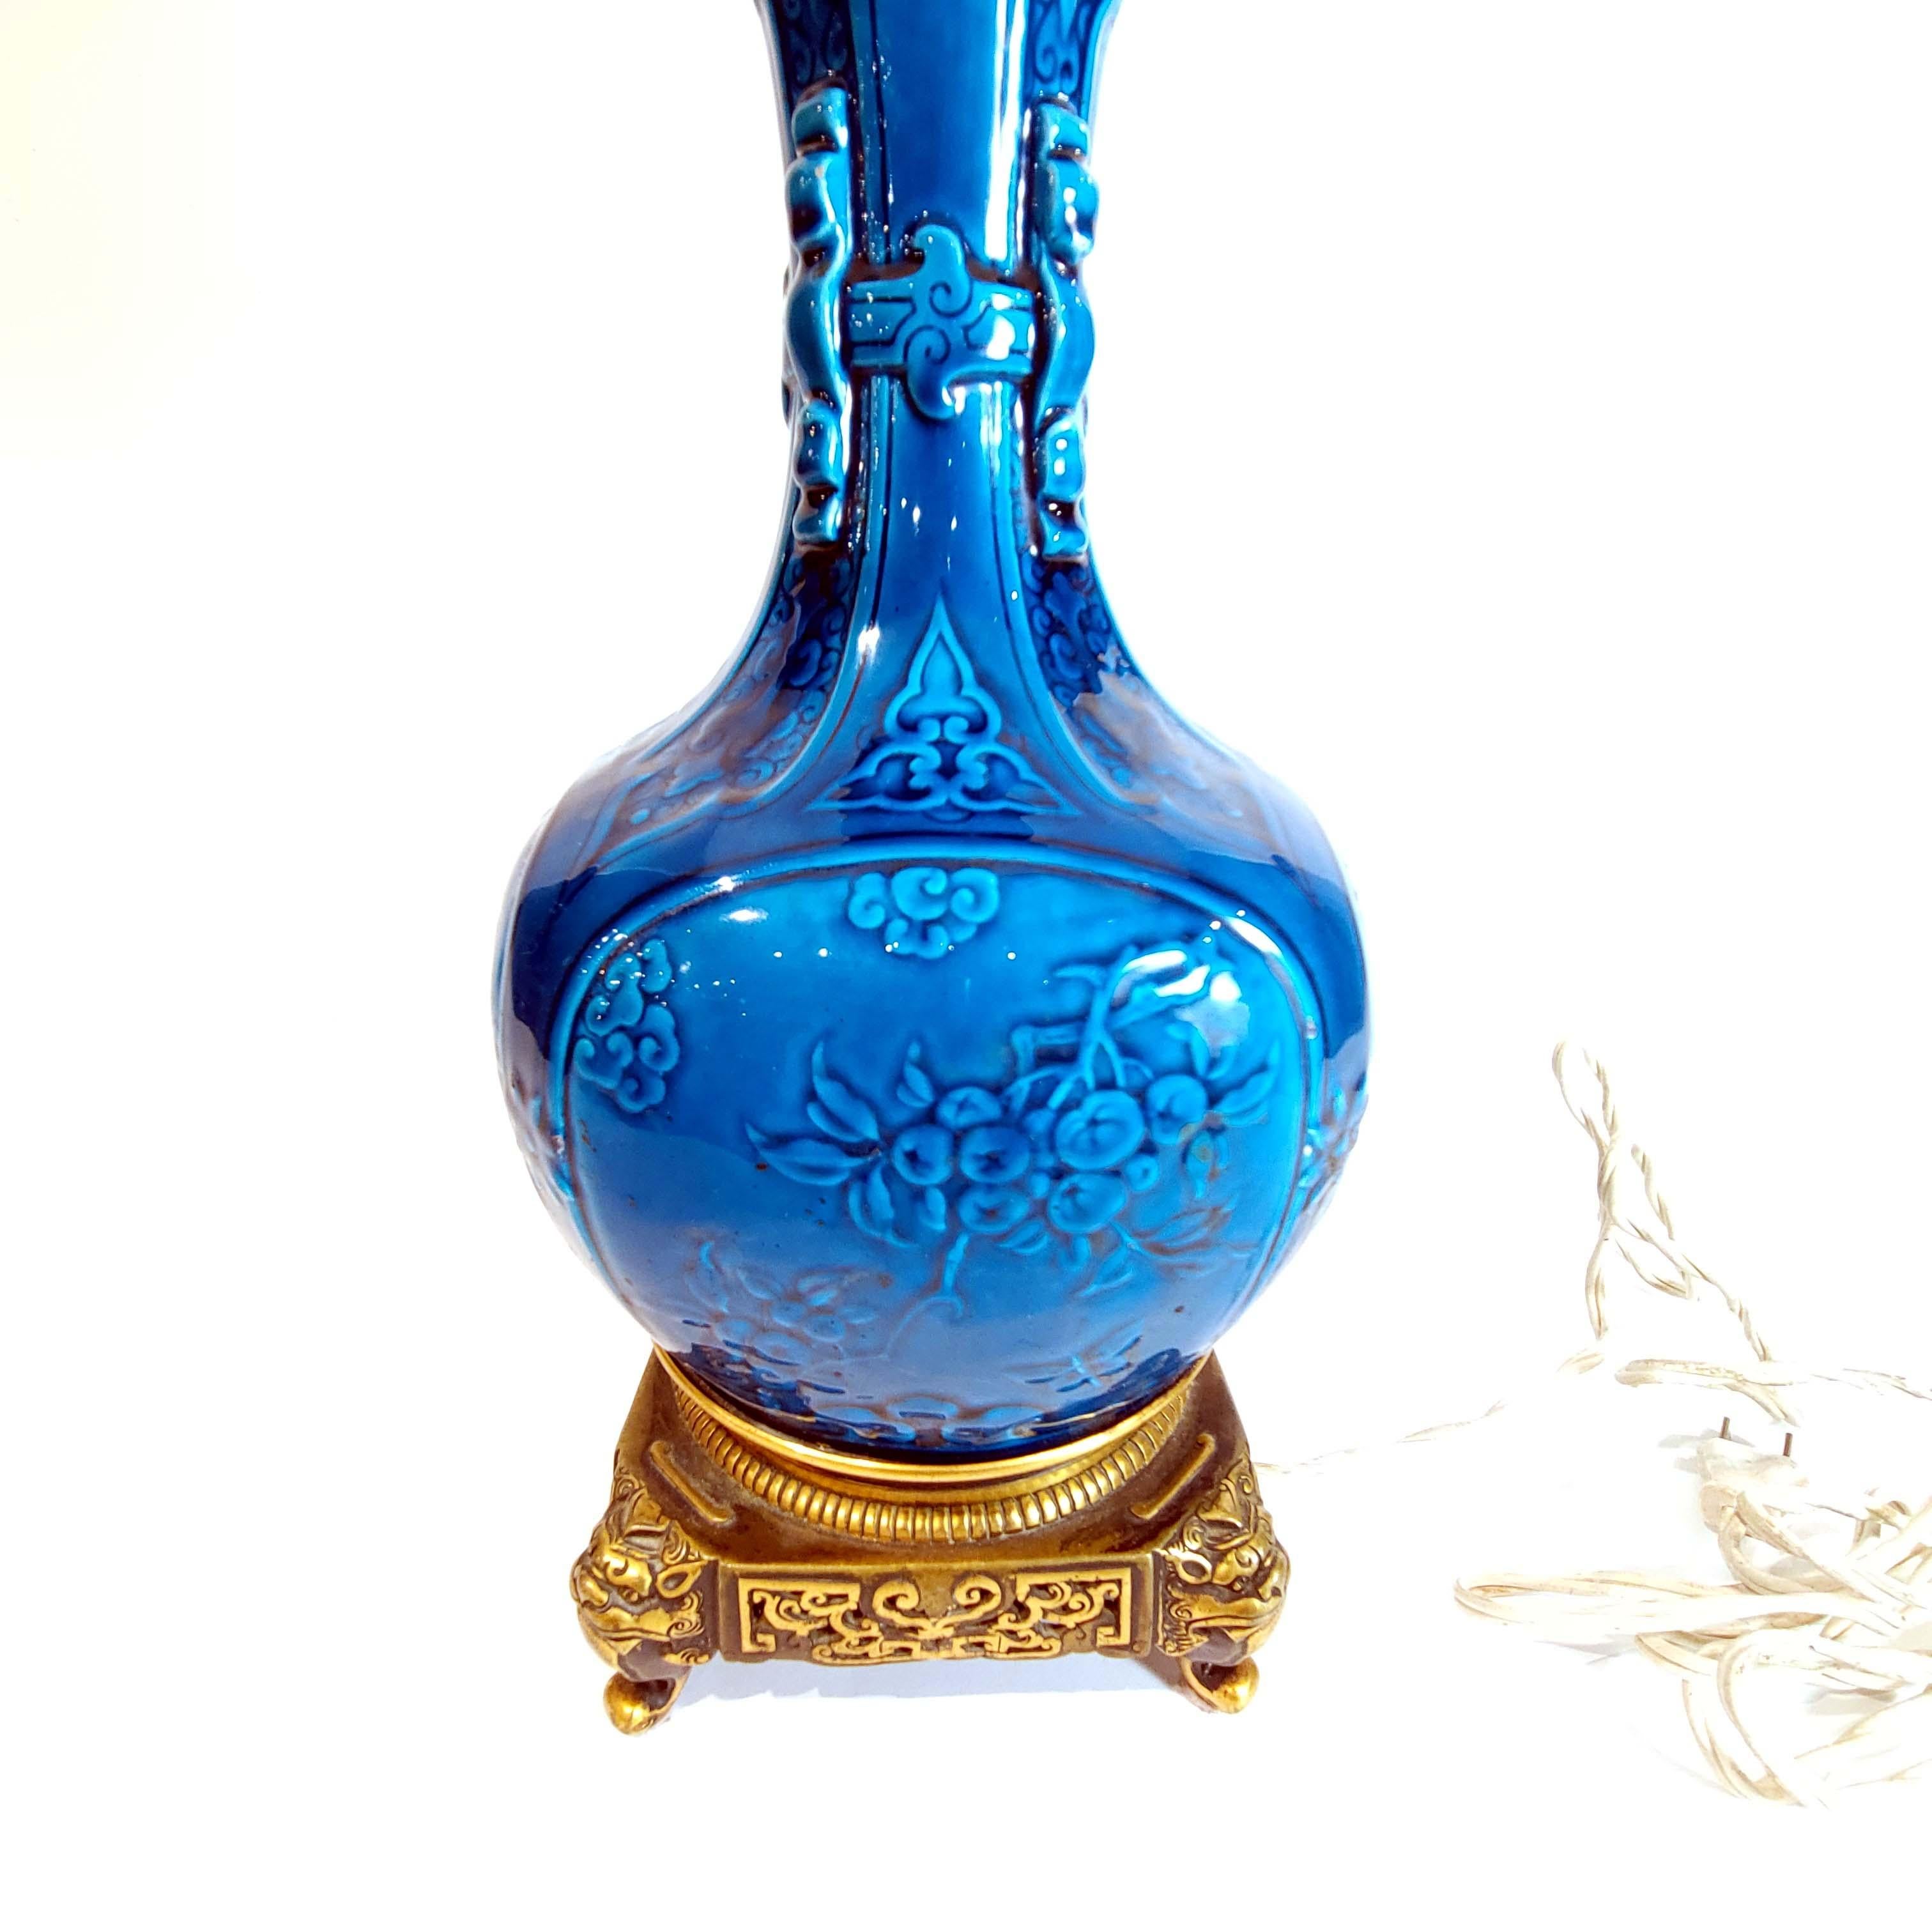 Late 19th Century Ormolu Mounted  THEODORE DECK 'PERSIAN BLUE' Vase Mounted as Lamp